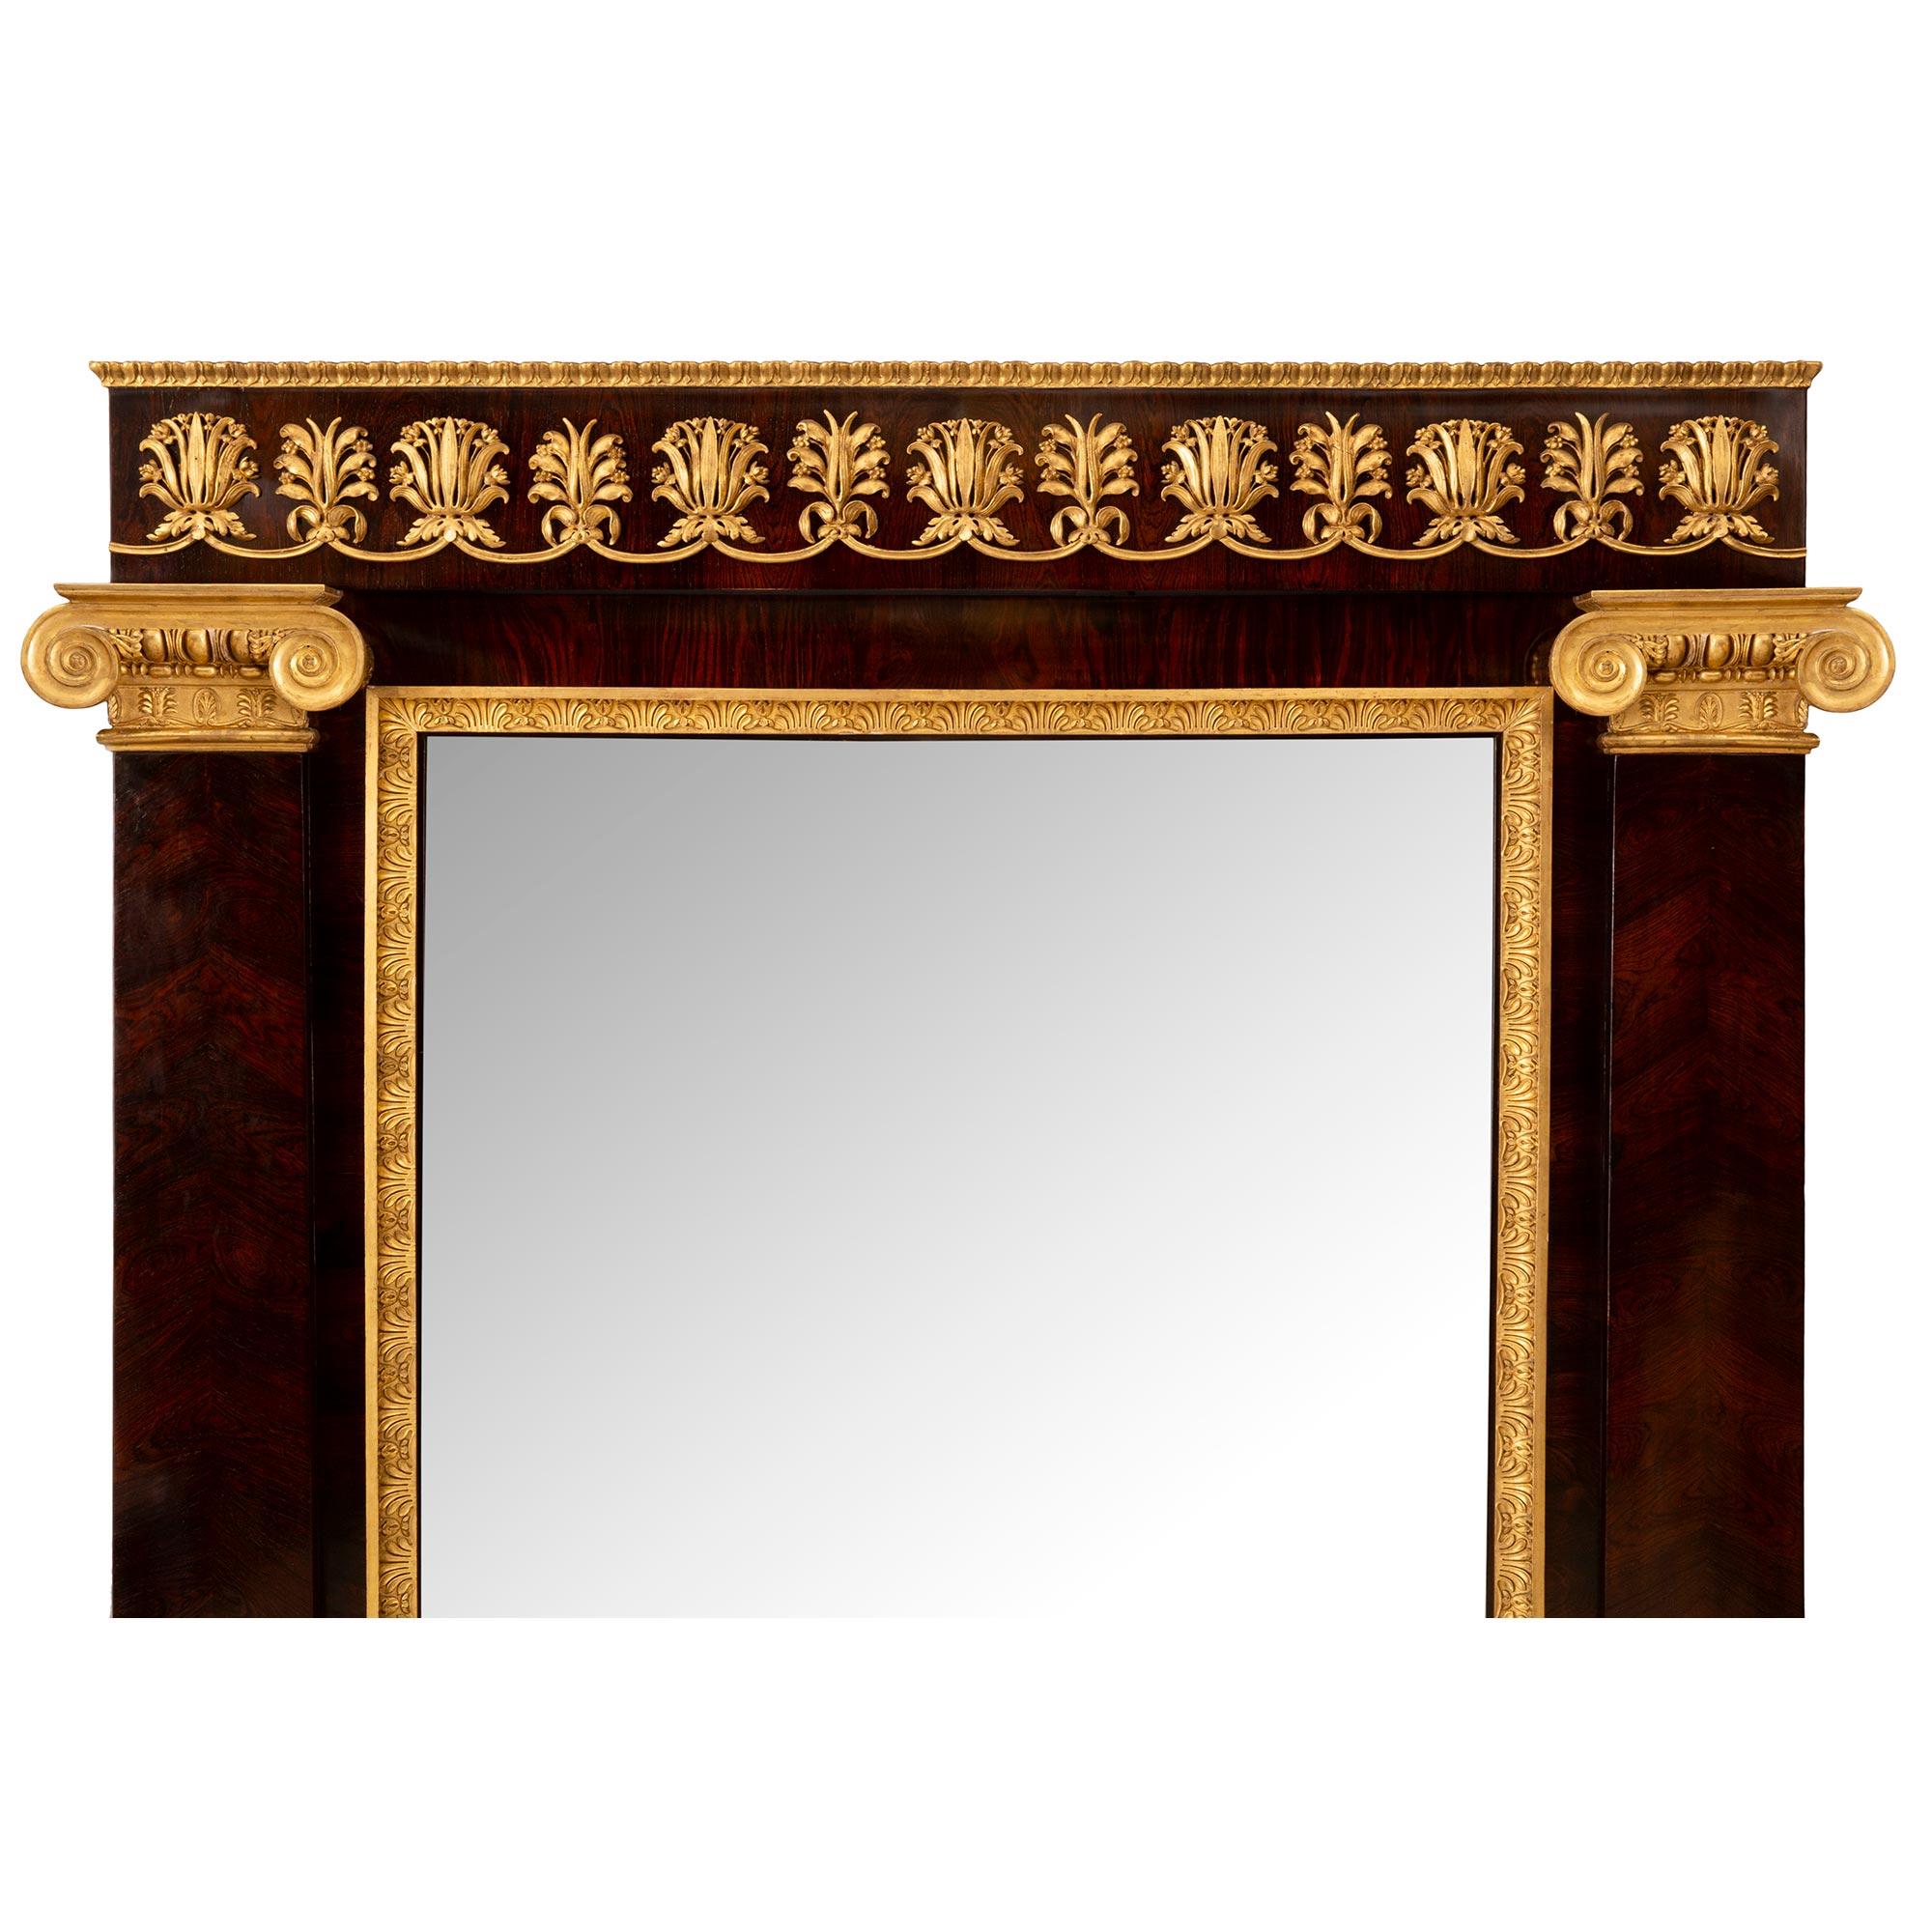 Italian Mid-19th Century Neoclassical Style Rosewood and Giltwood Mirror For Sale 1